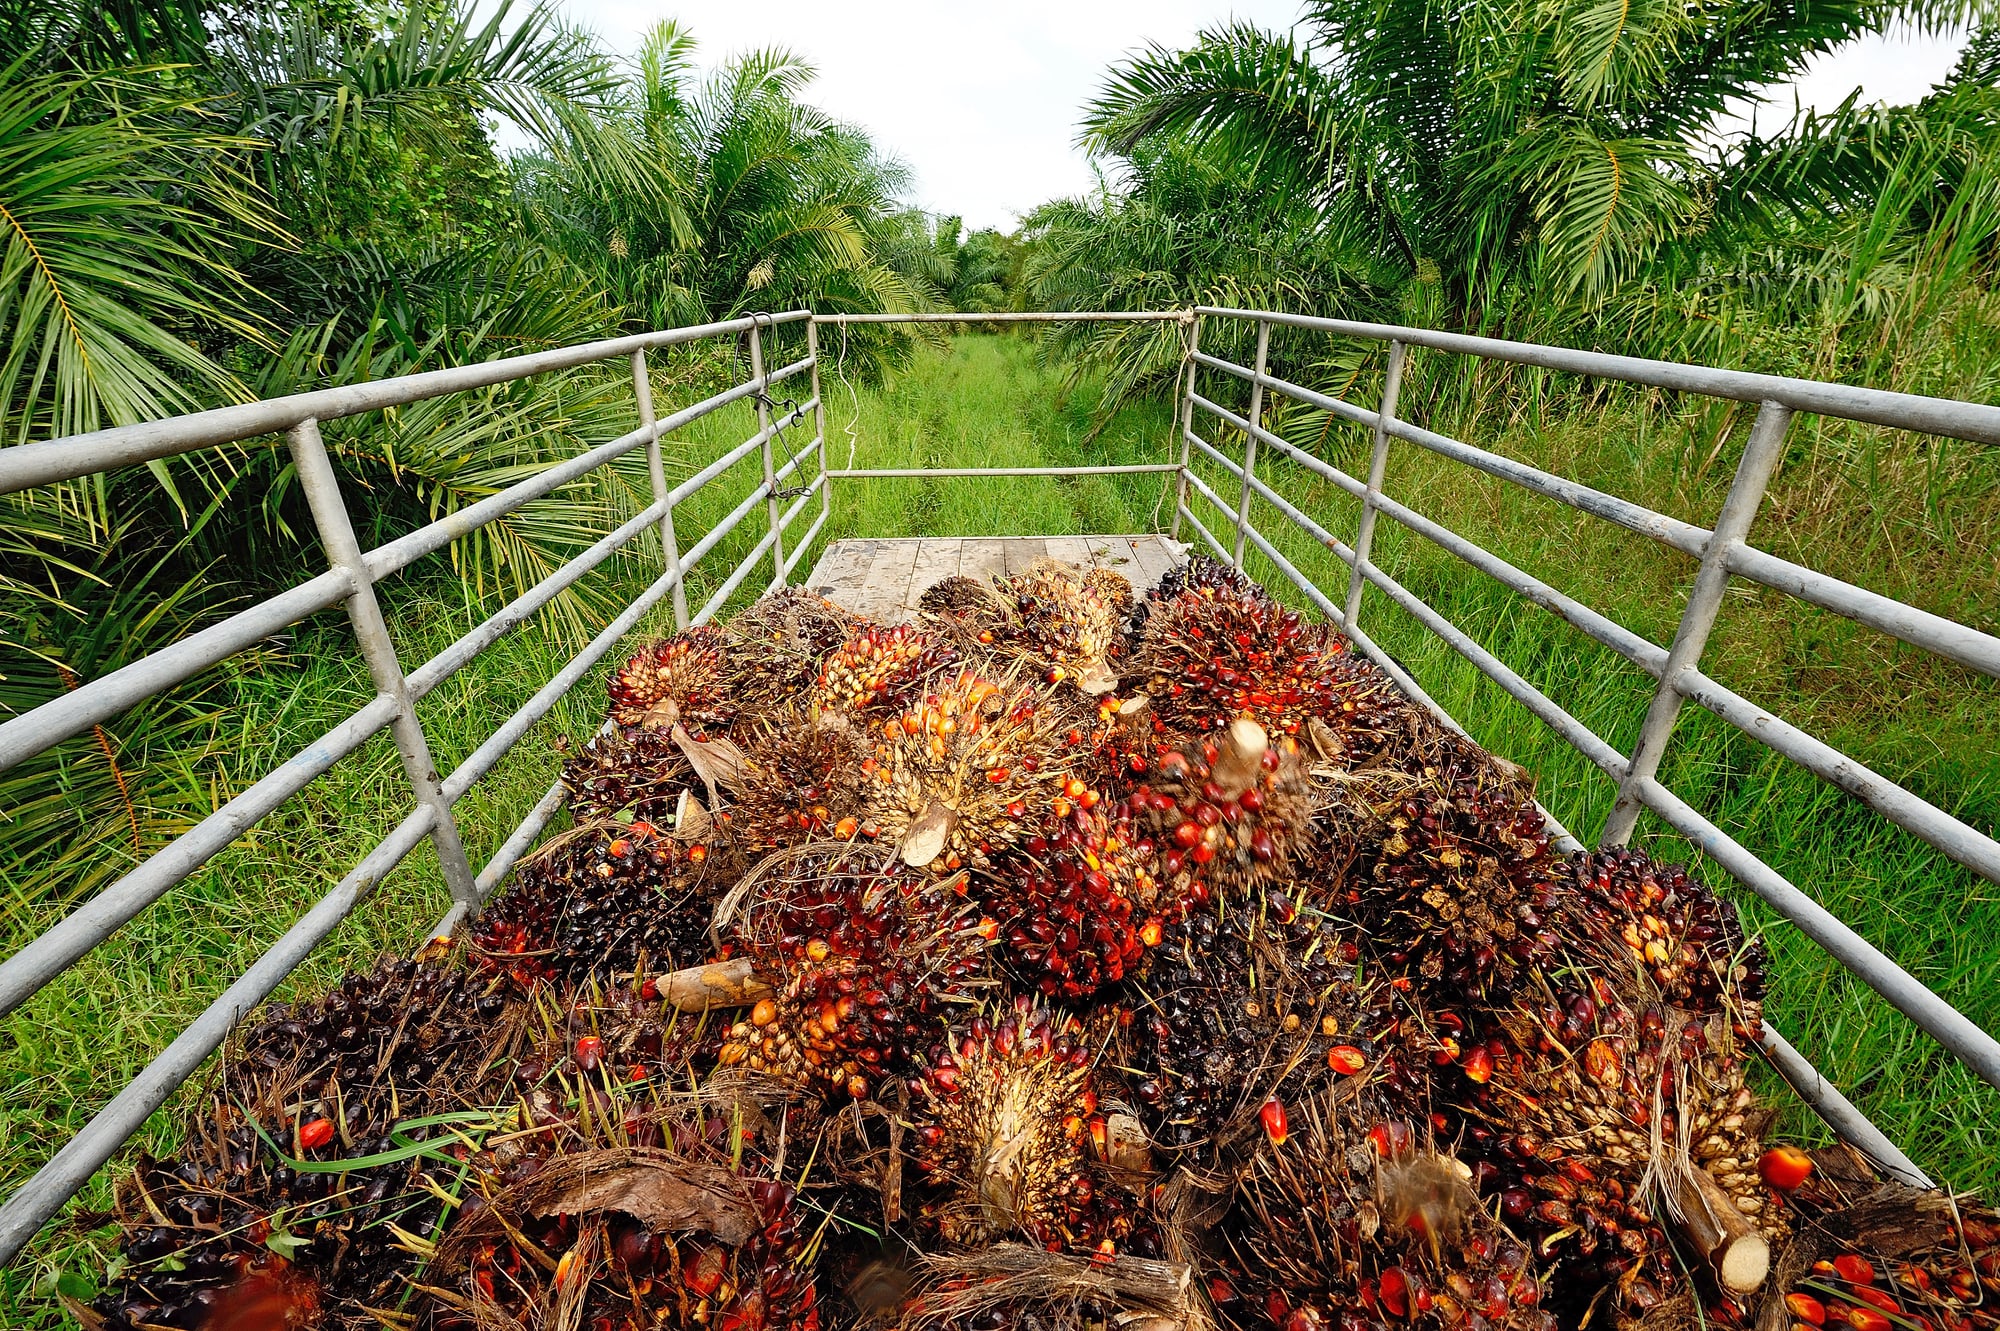 Sowing disaster. How does palm oil affect the environment?